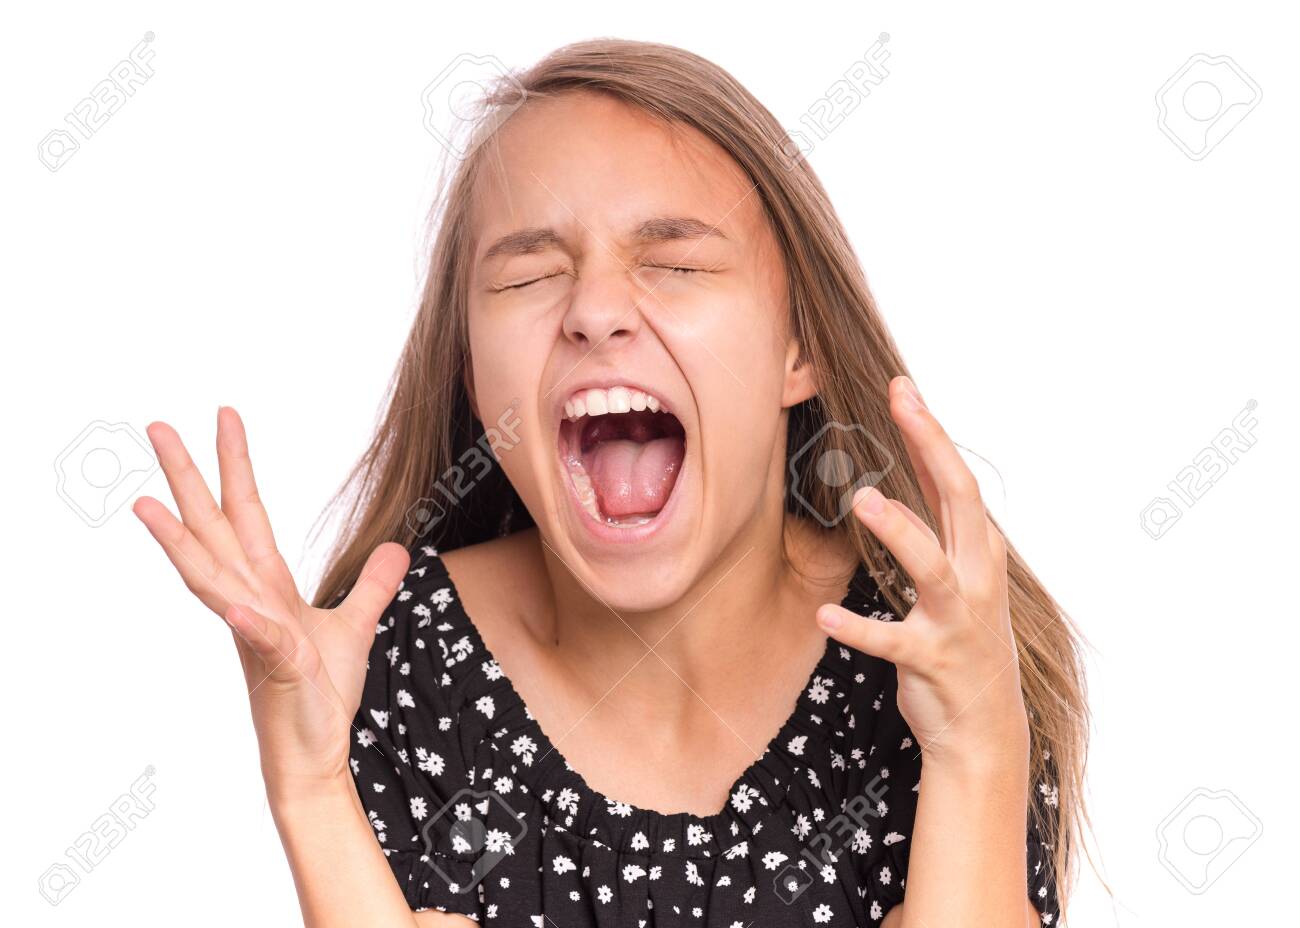 Angry Screaming Teen Girl Isolated On White Background Human